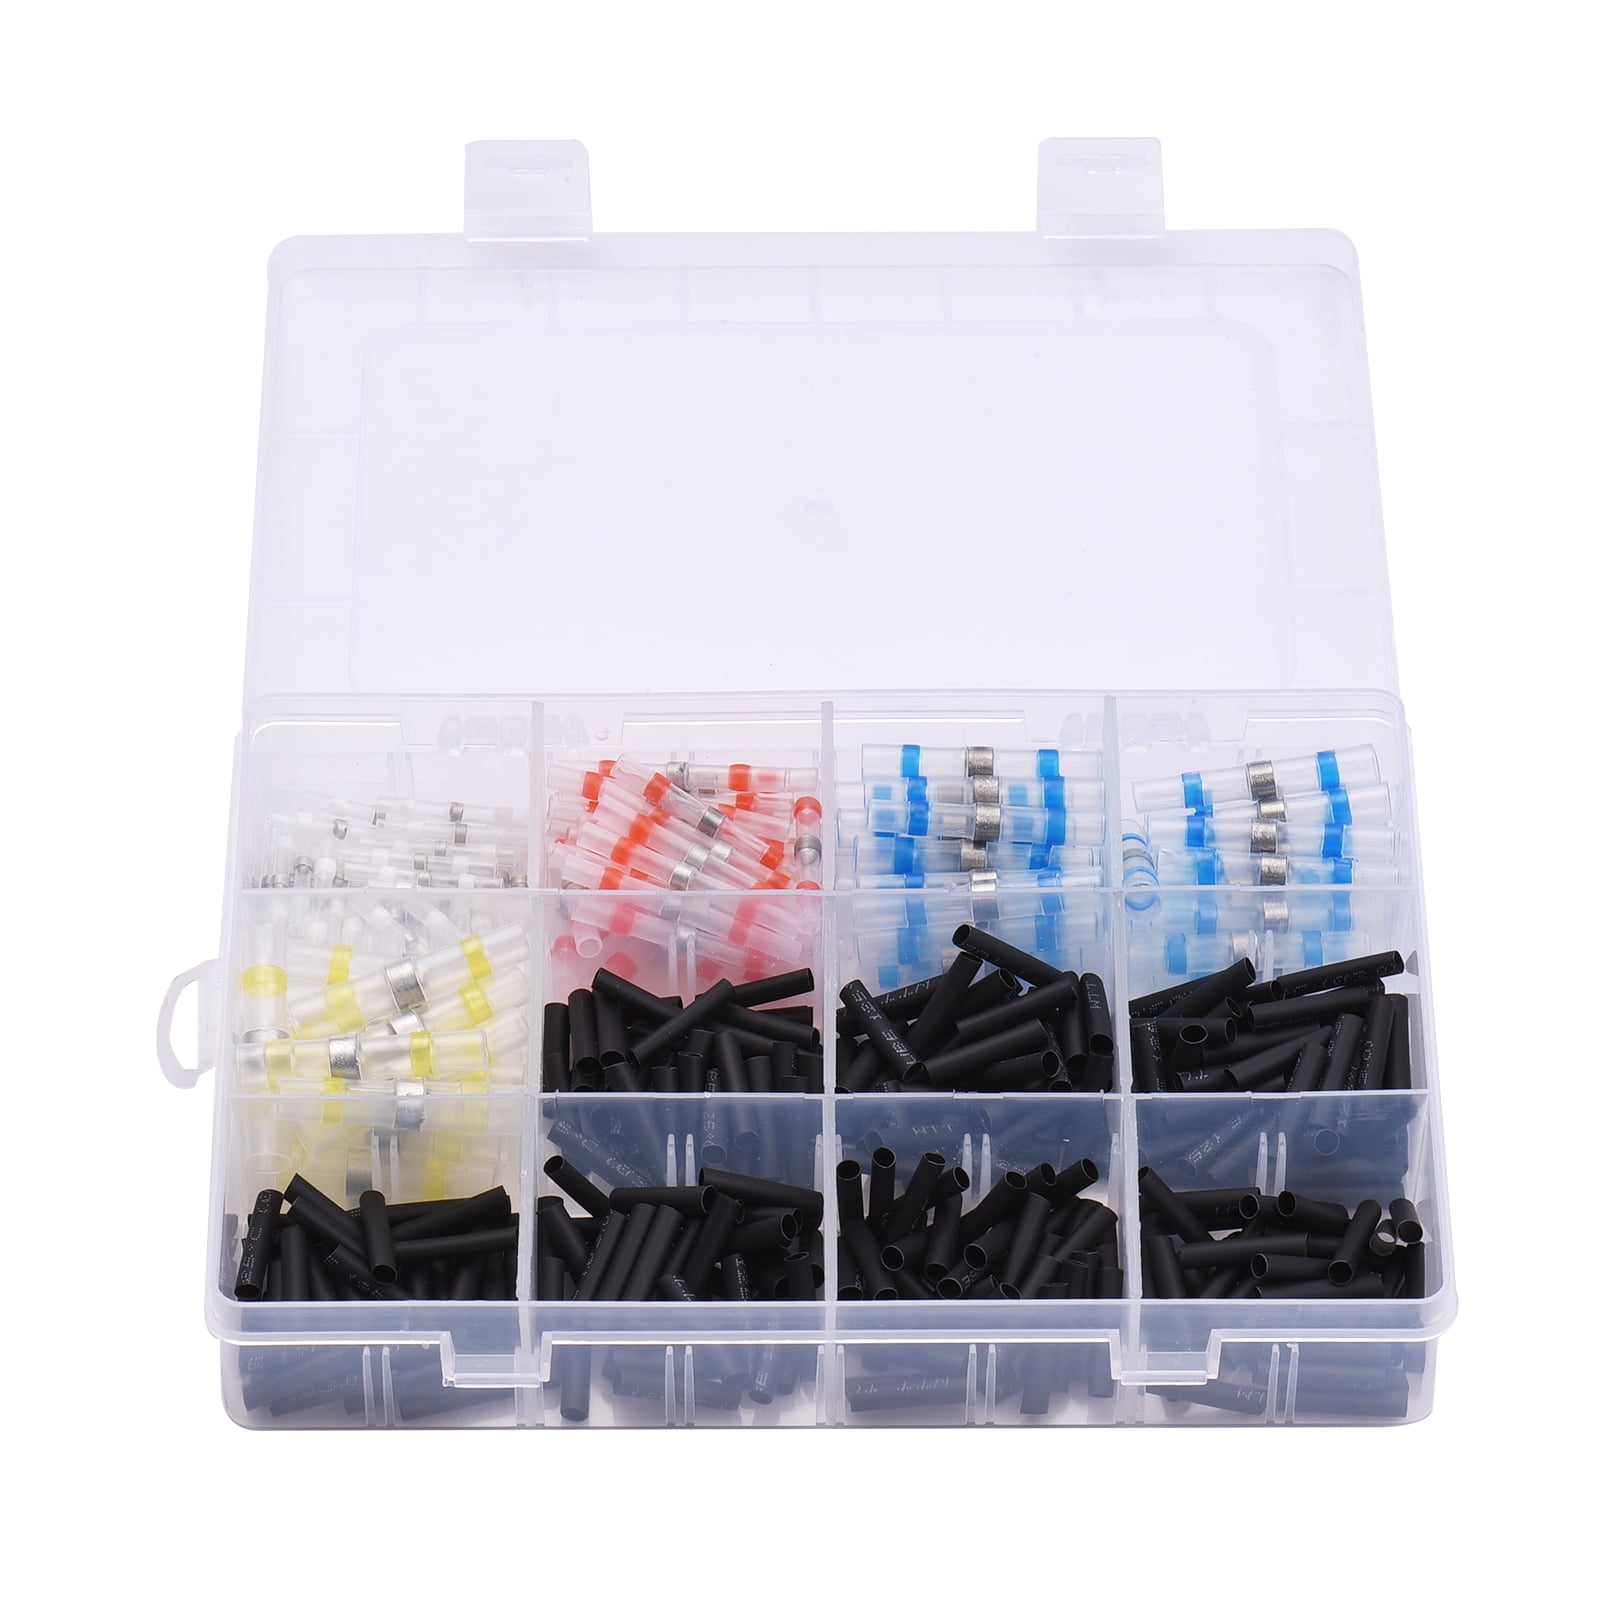 60Pcs AWG Heat Shrink Insulated Electrical Wire Connectors Bullet Terminals M/F 